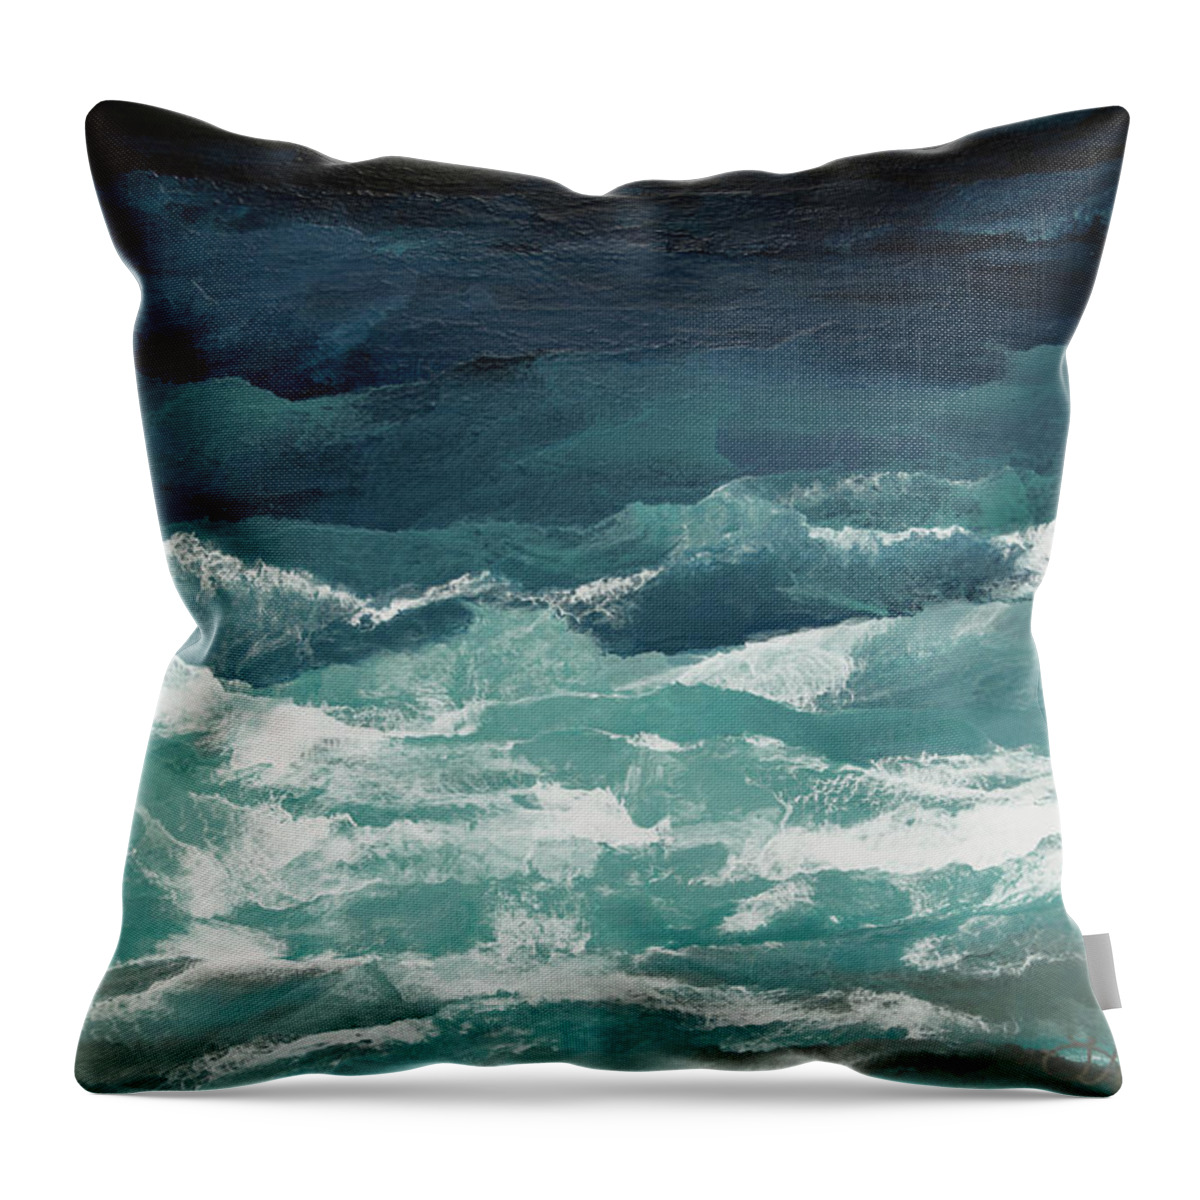  Abstract Seascape Throw Pillow featuring the painting Abundant as the Seas by Linda Bailey